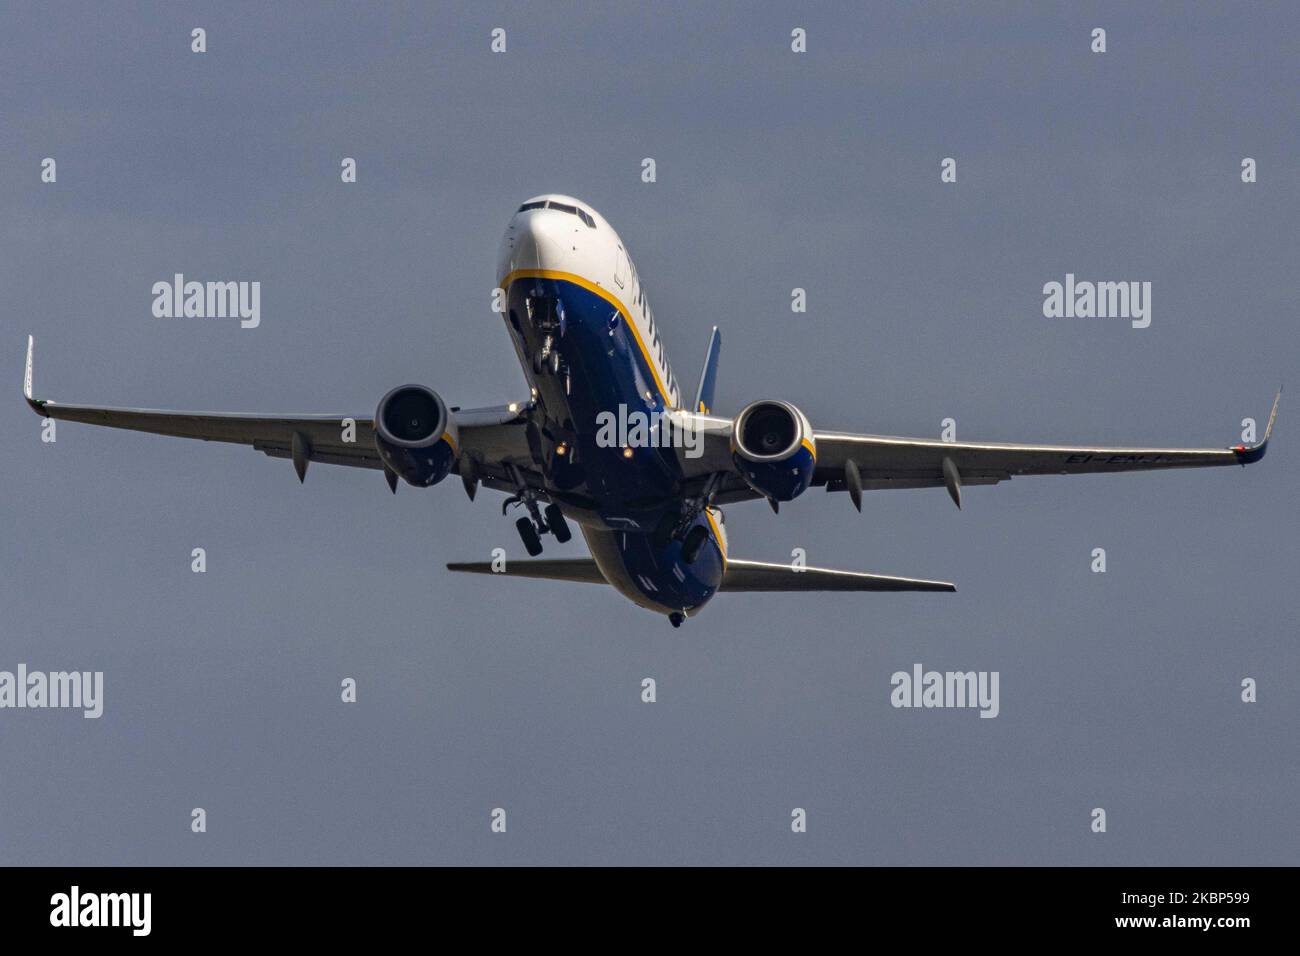 A Ryanair Boeing 737-800 commercial aircraft as seen during takeoff rotating and flying off the runway at Eindhoven EIN EHEH airport in the Netherlands. The narrow body Boeing 737NG airplane has the registration EI-ENJ. Ryanair RYR FR is an Irish budget airline, the largest European low cost carrier with headquarters in Dublin, Irelands. February 2020 (Photo by Nicolas Economou/NurPhoto) Stock Photo